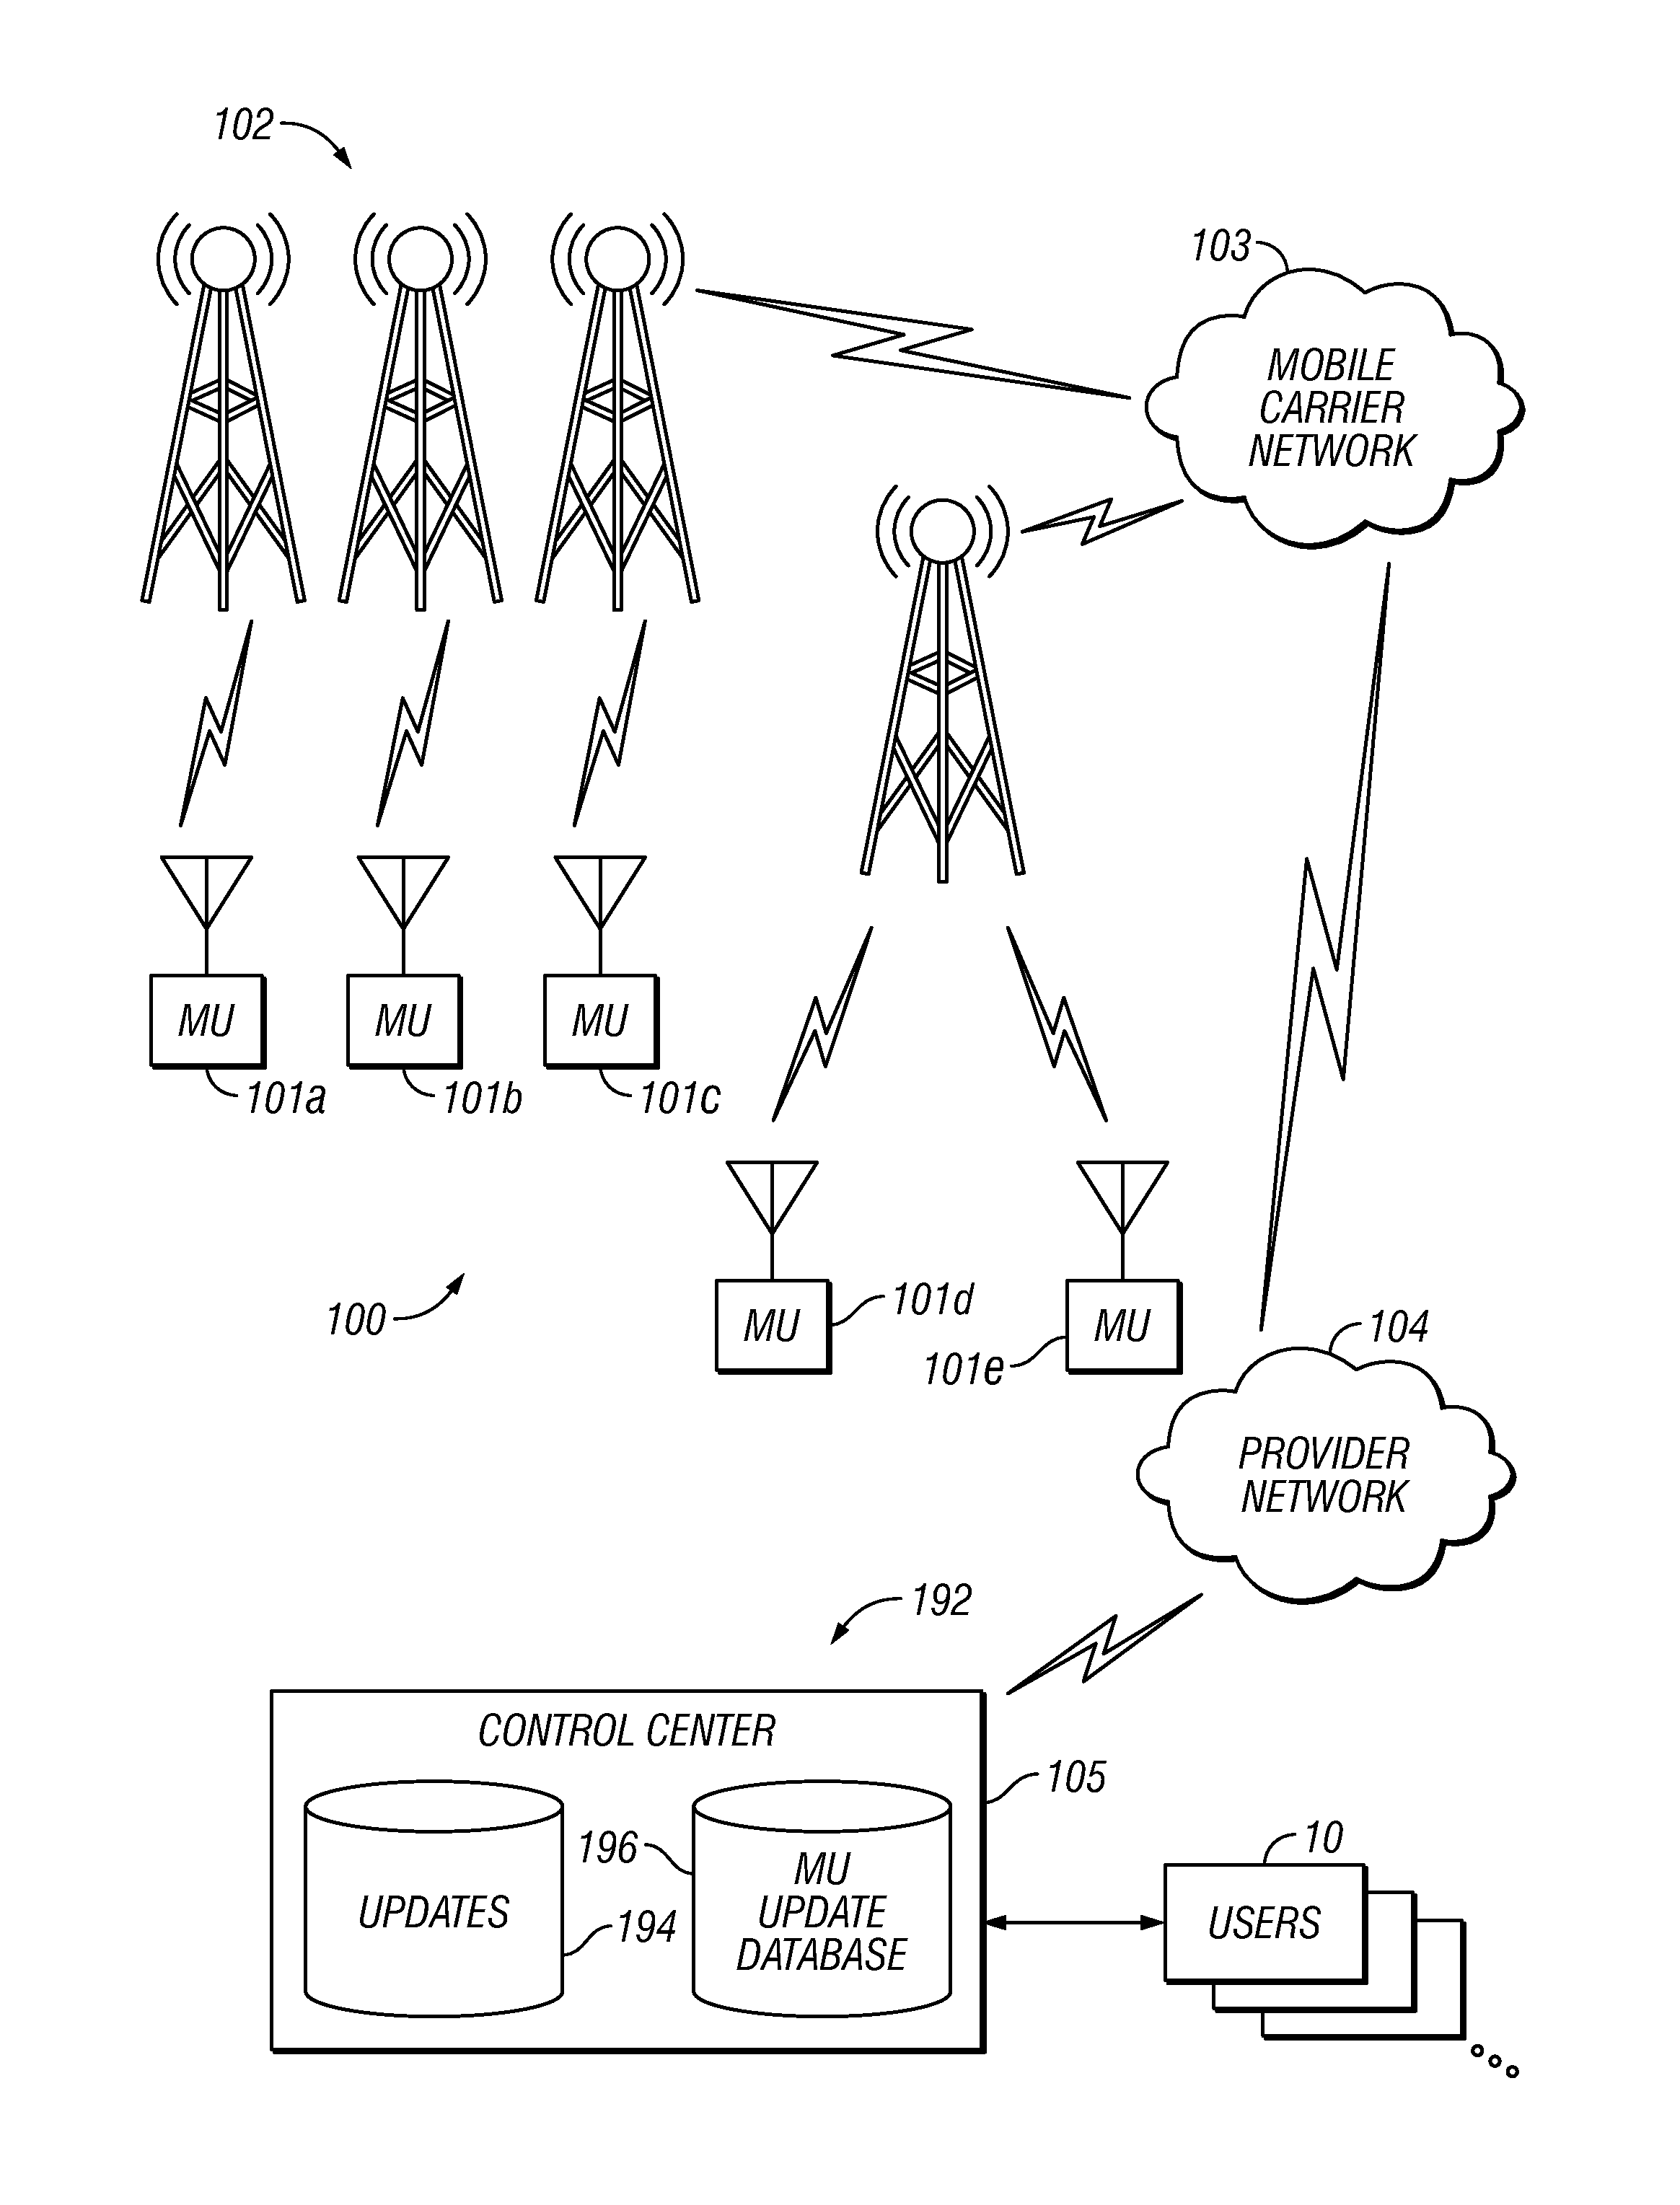 Telemetry system with remote firmware updates or repair for remote monitoring devices when the monitoring device is not in use by the user